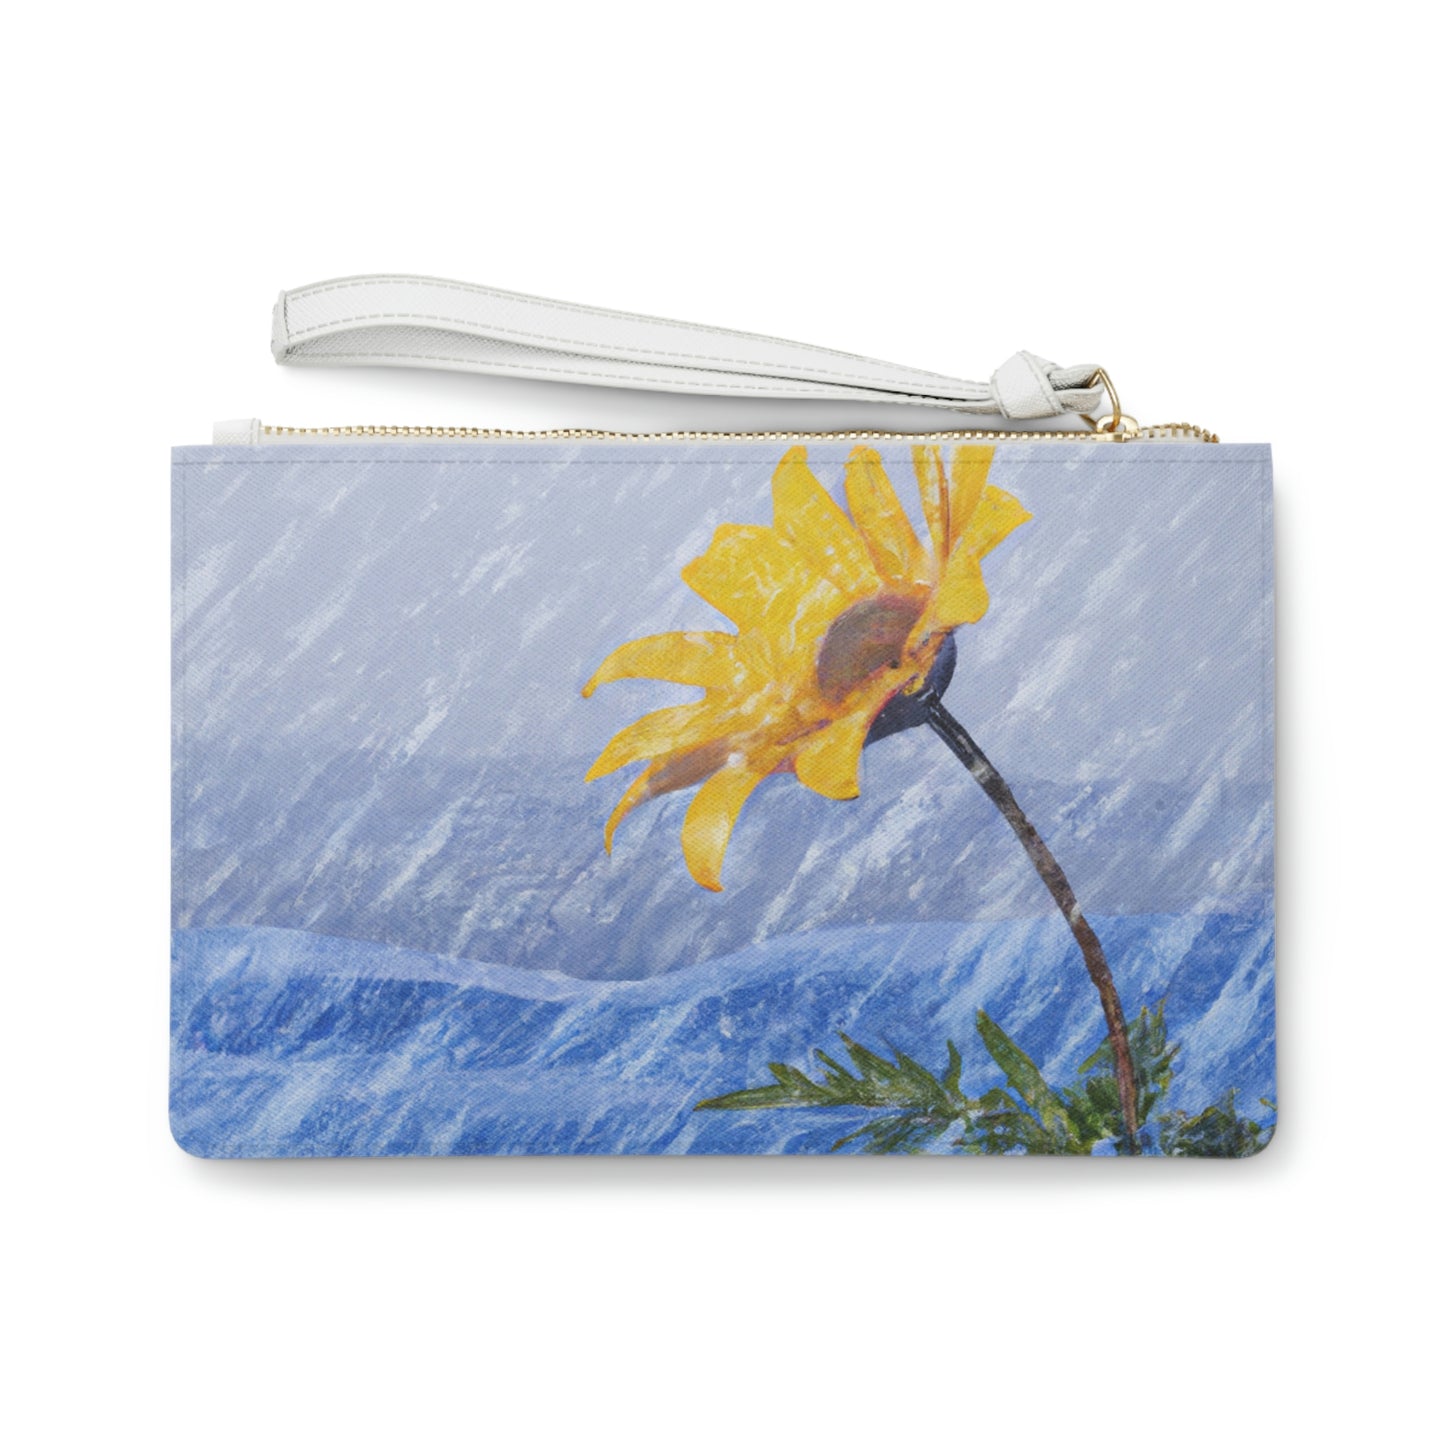 "A Burst of Color in the Glistening White: The Miracle of a Flower Blooms in a Snowstorm" - The Alien Clutch Bag